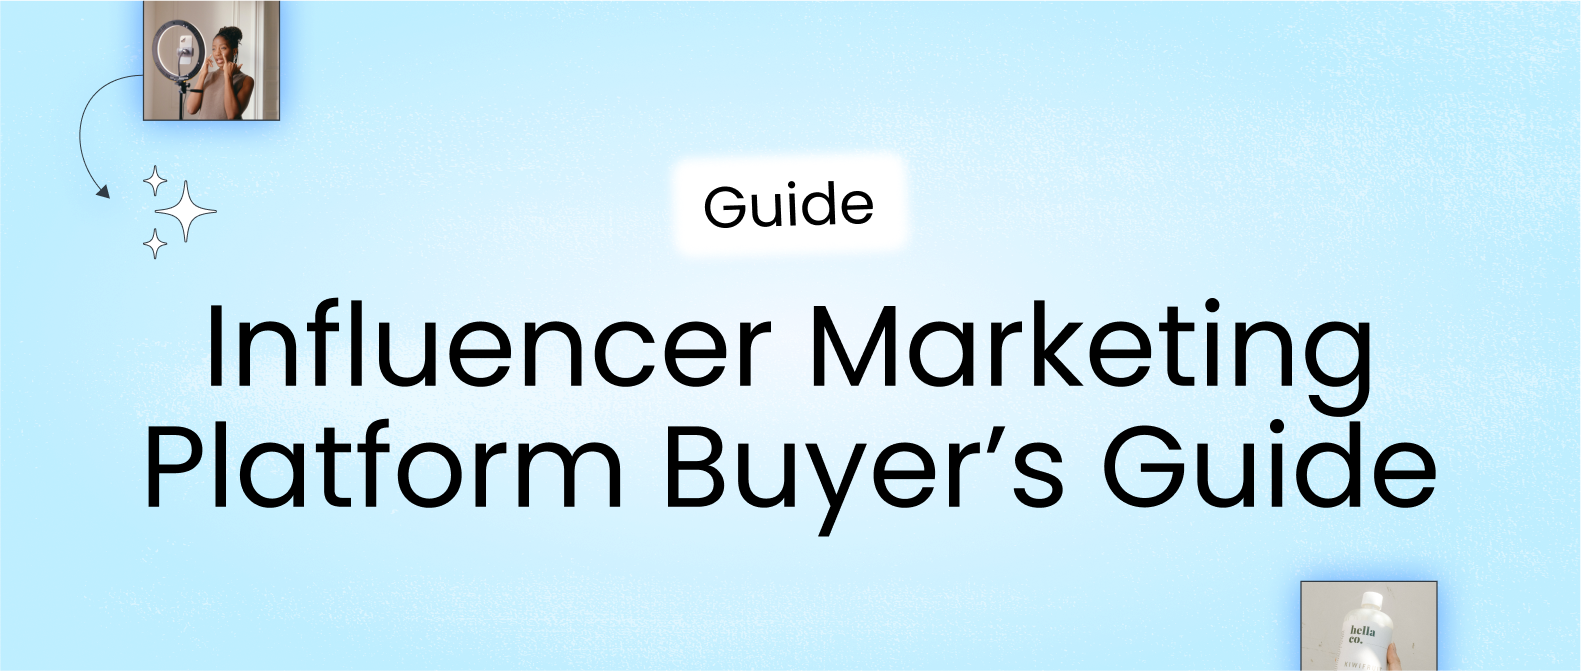 Free influencer marketing platform buyer’s guide for brand marketers.